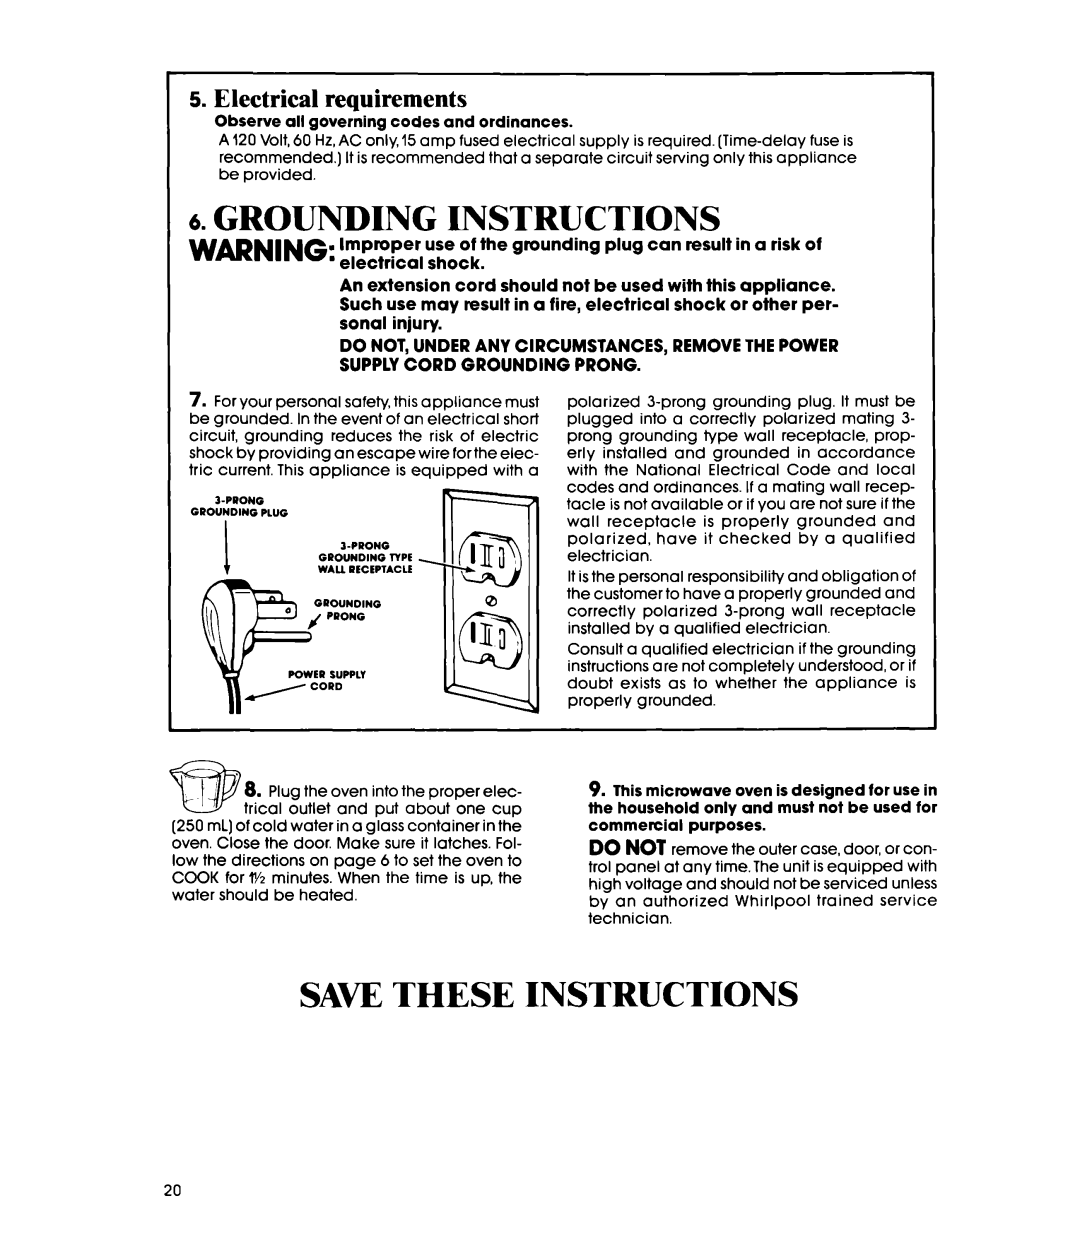 Whirlpool MW8520XP manual Grounding Instructions, Saw These Instructions, Electrical requirements 